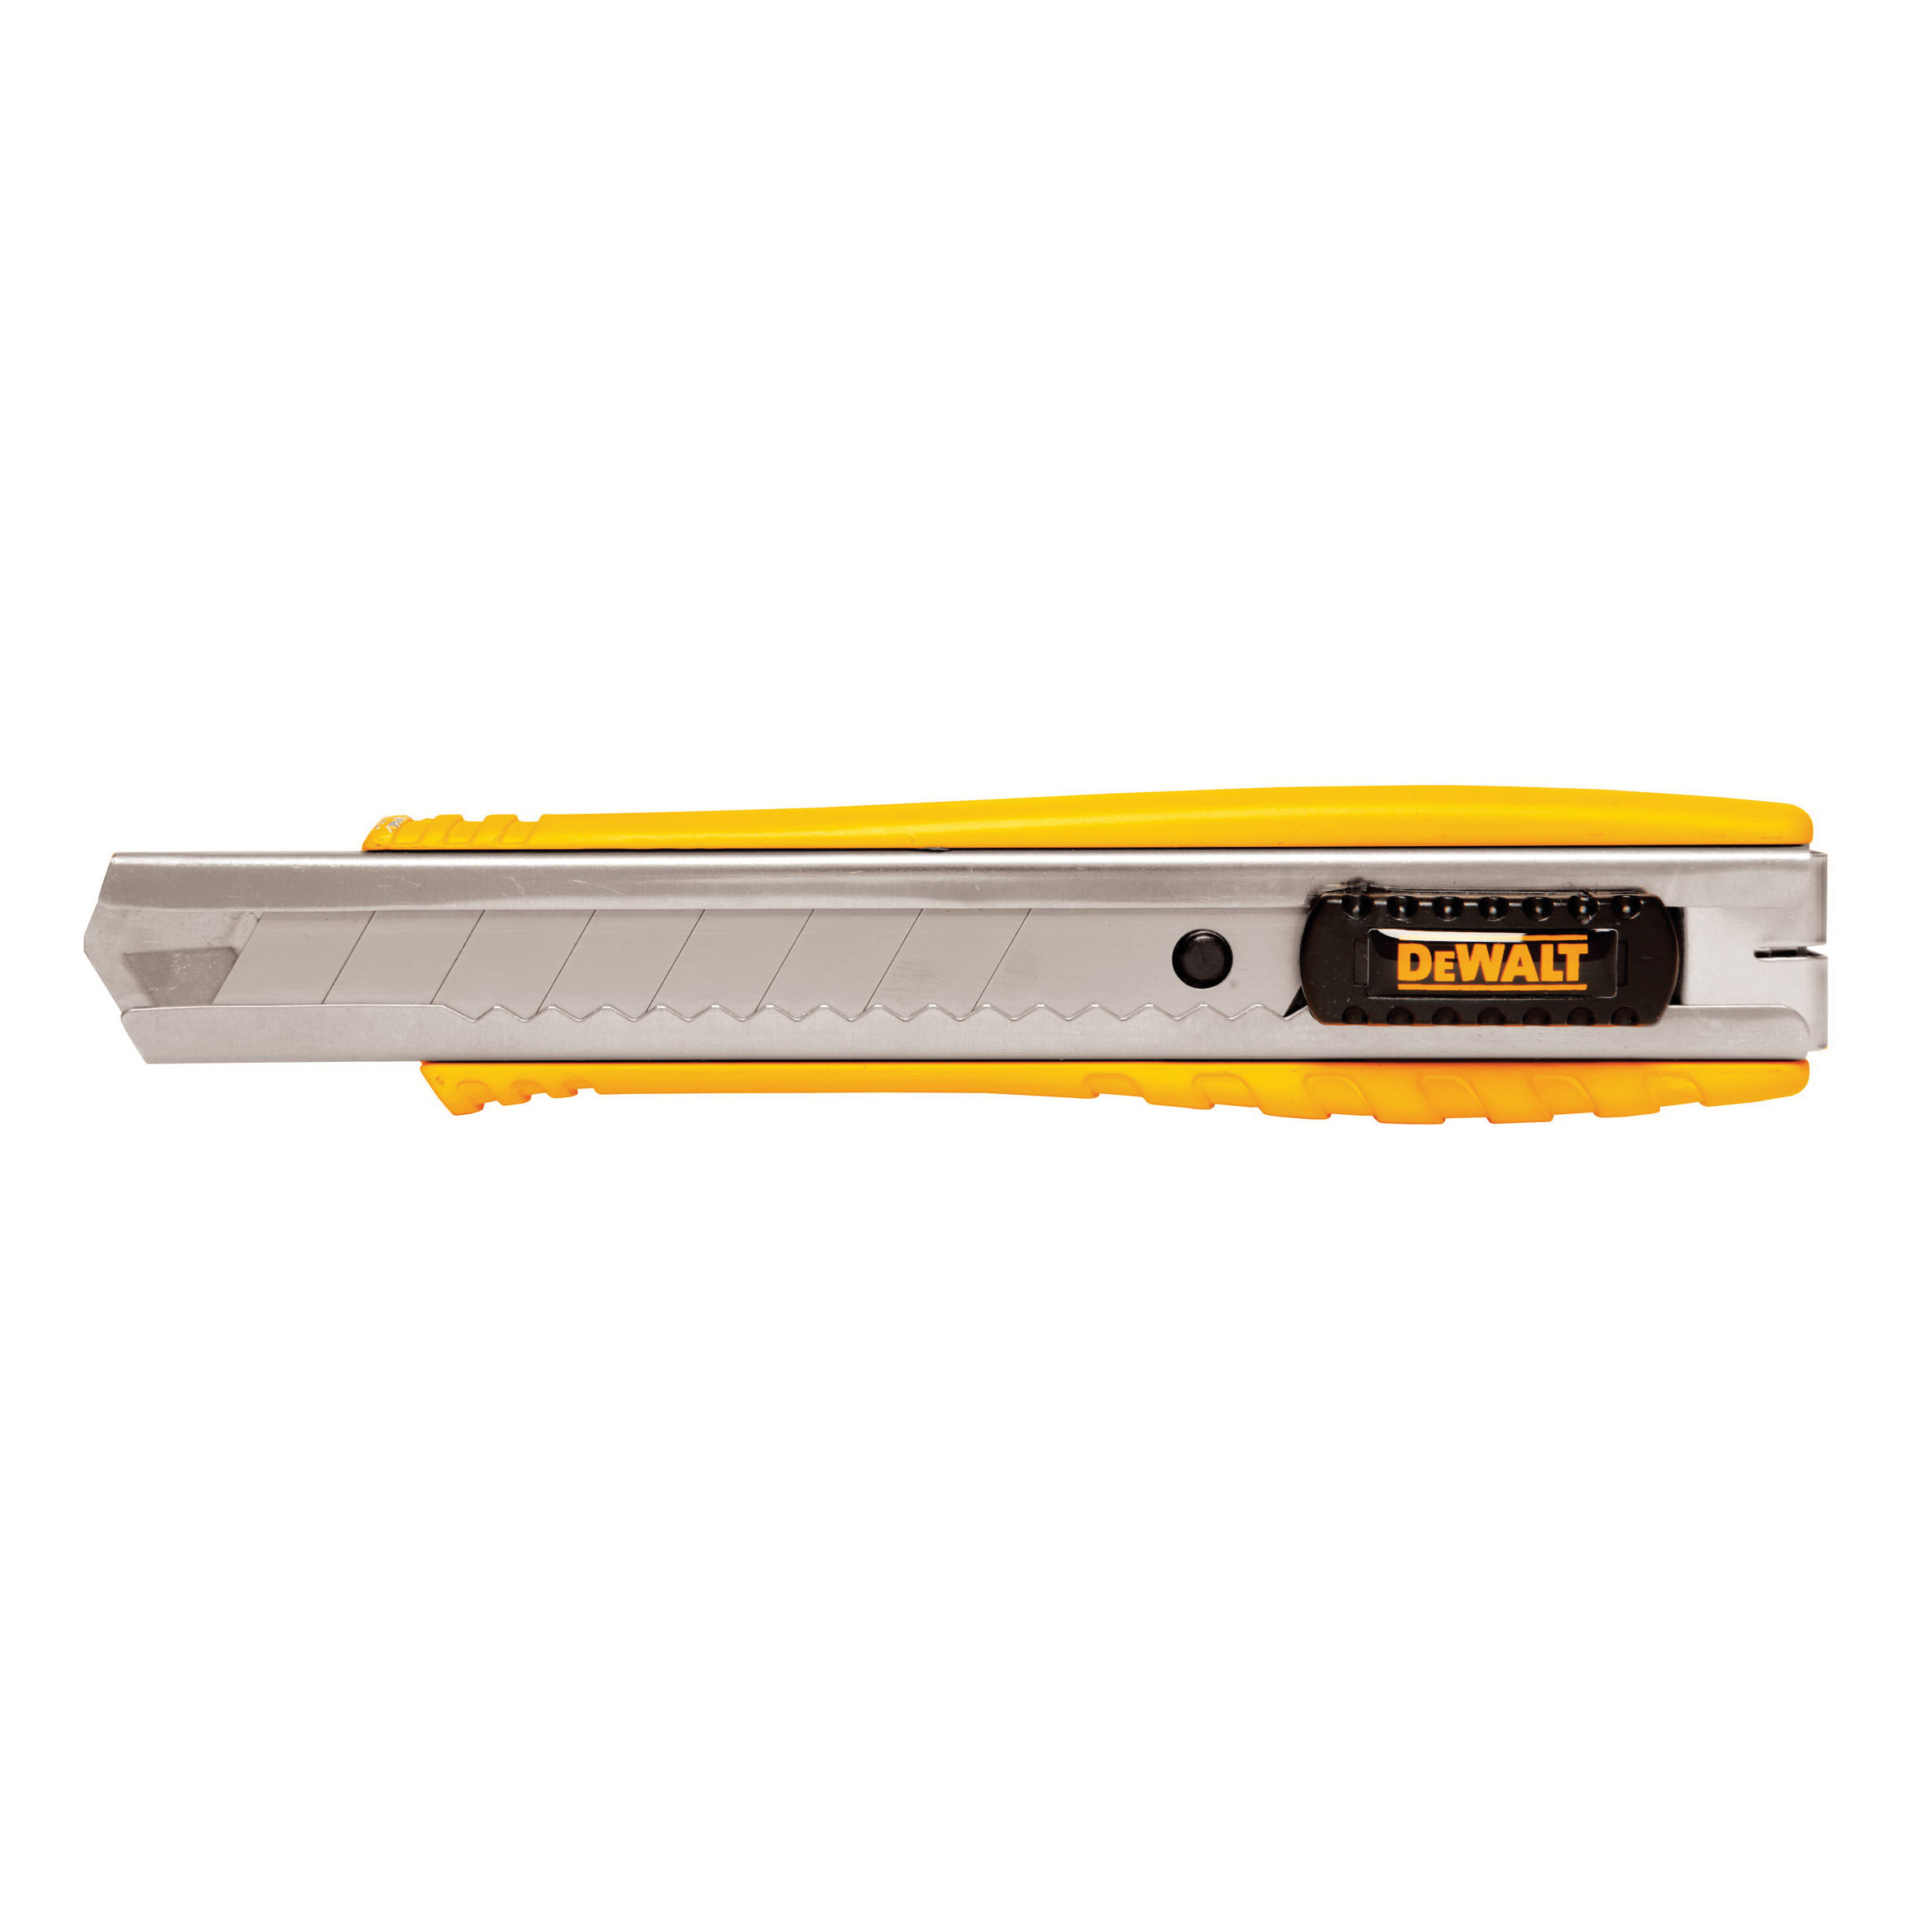 DeWALT® DWHT10038 Standard Utility Knife, 18 mm W Integrated/Snap-Off Blade, Push Button, Carbon Steel Blade, 1 Blade Included, 6-1/4 in OAL